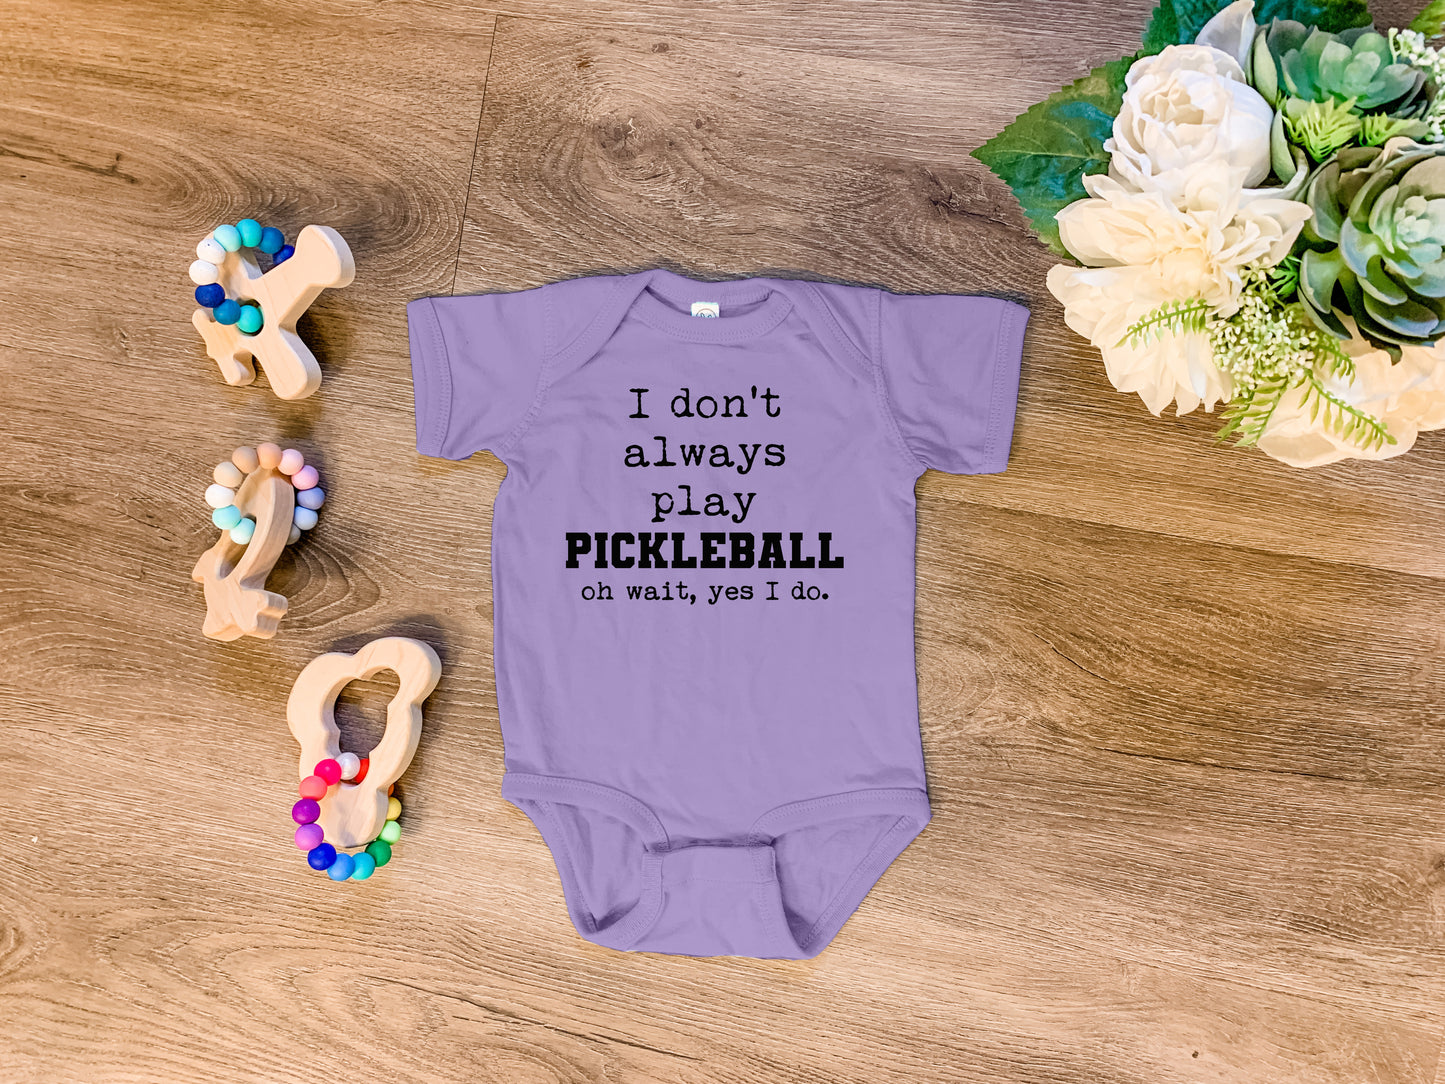 I Don't Always Play Pickleball (Oh Wait, Yes I Do) - Onesie - Heather Gray, Chill, or Lavender